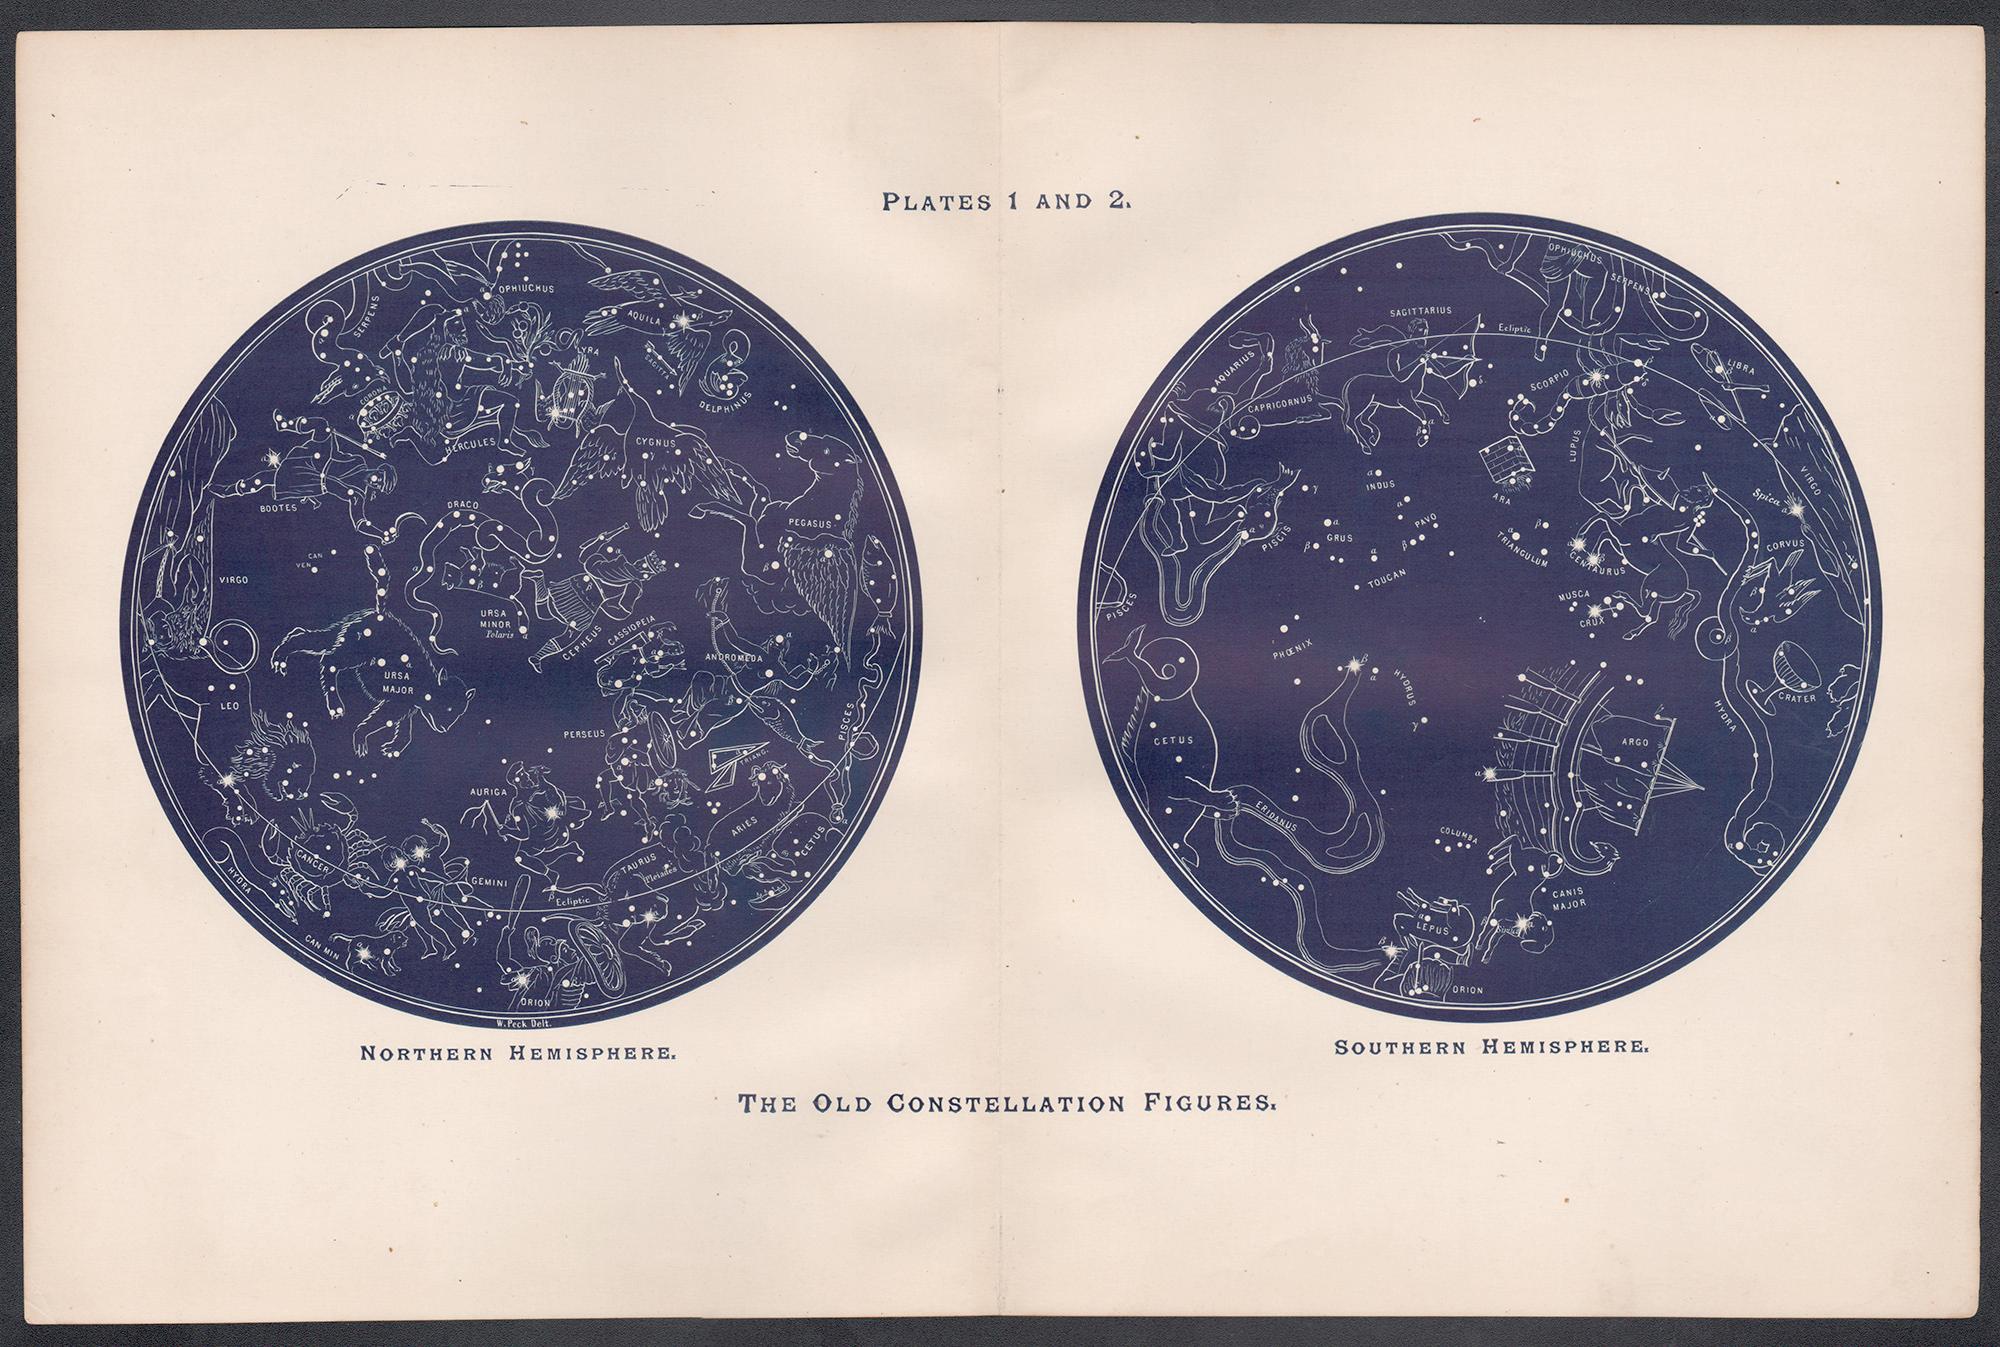 The Old Constellation Figures. Astronomy map of the stars. - Print by William Peck